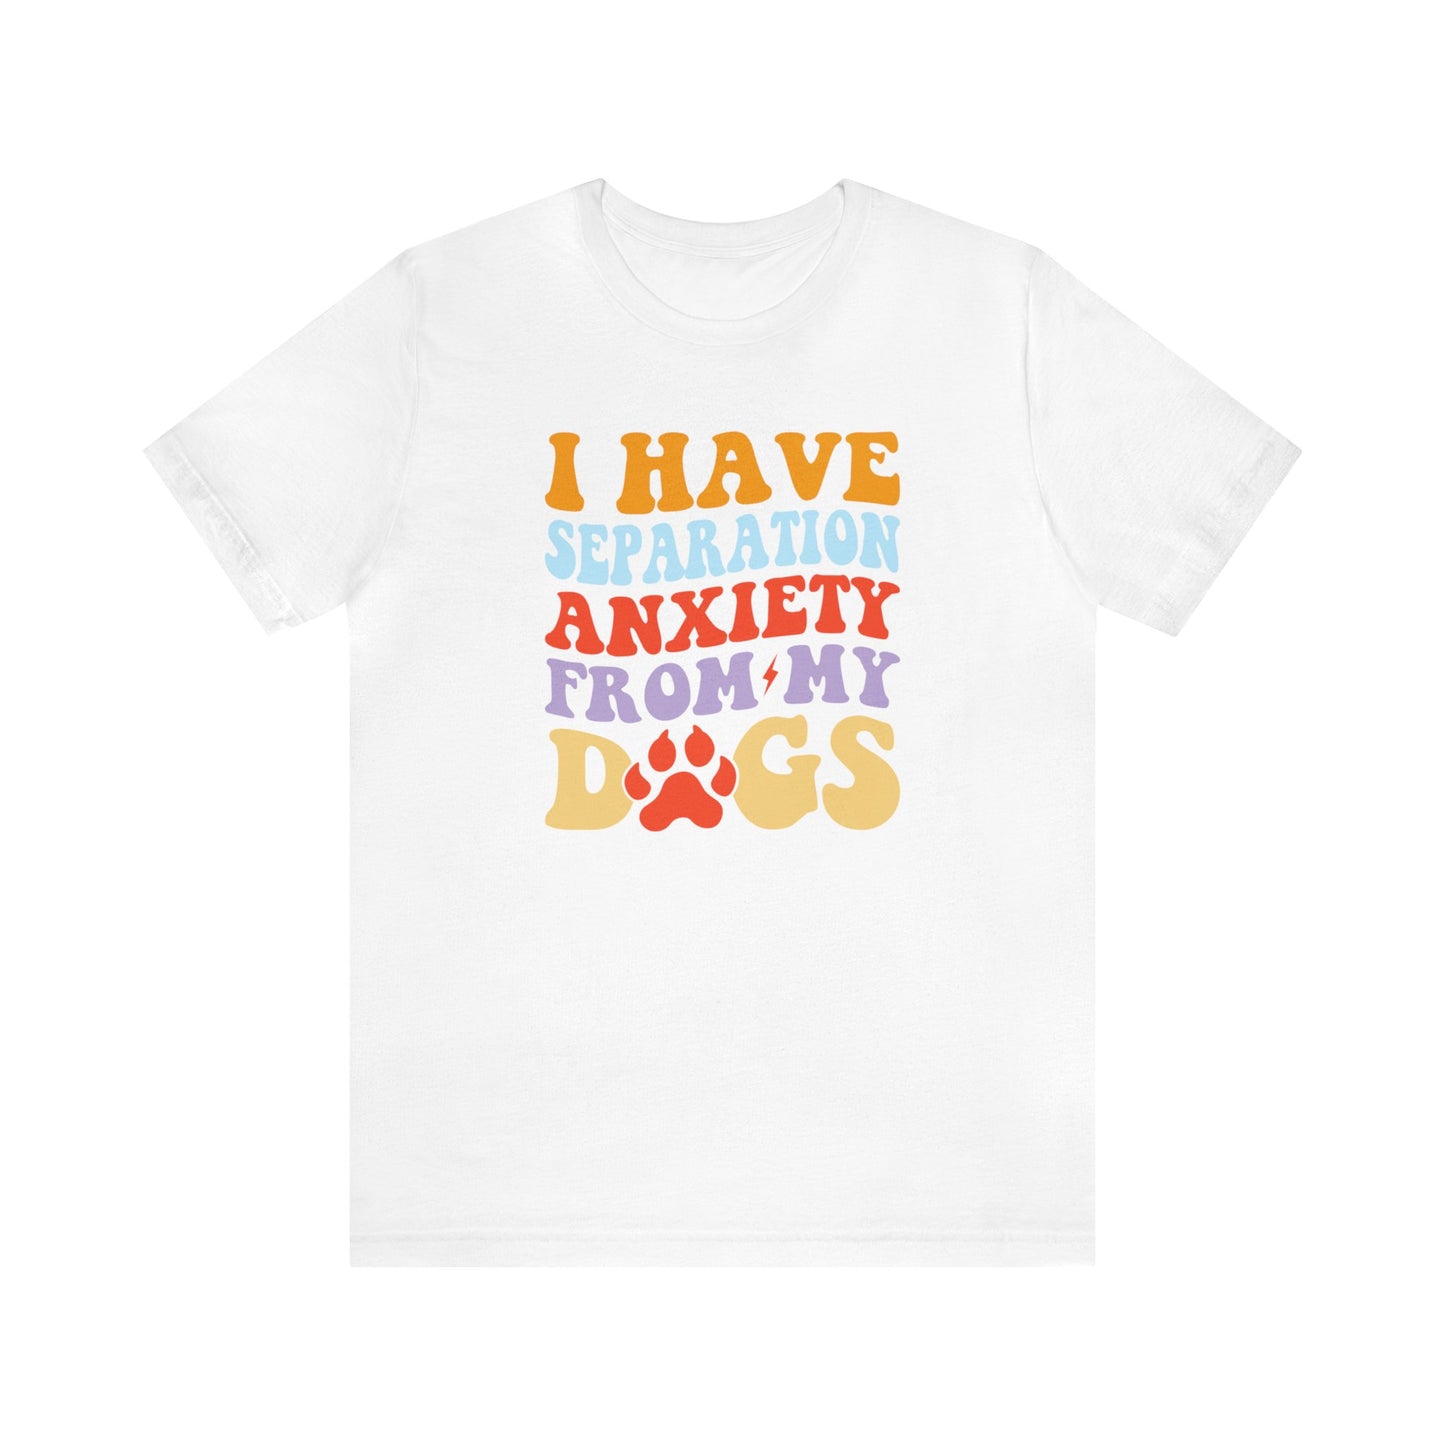 I have Separation Anxiety From My Dogs - Short Sleeve Tee